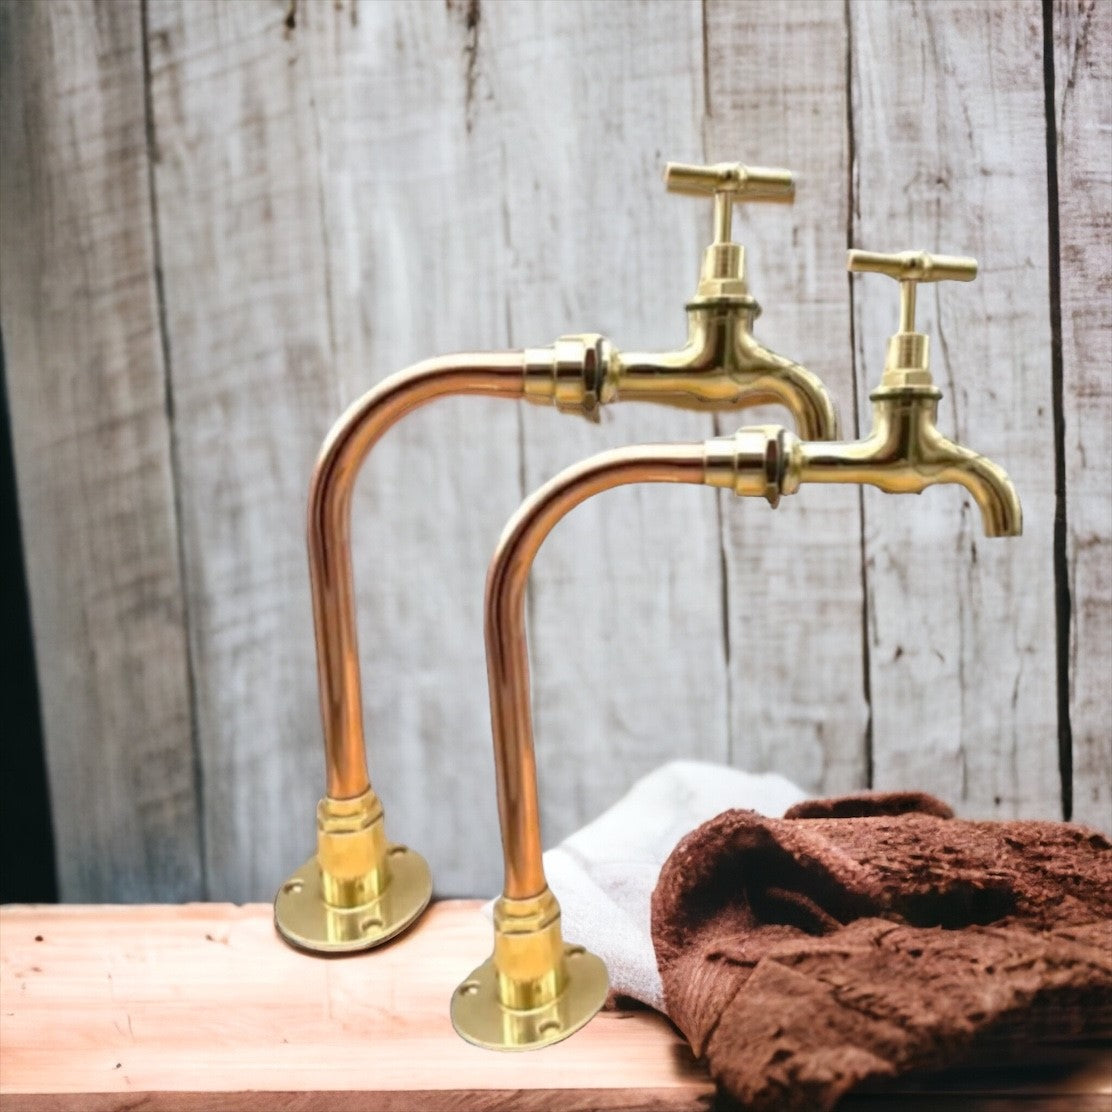 Copper and Brass Handmade Taps